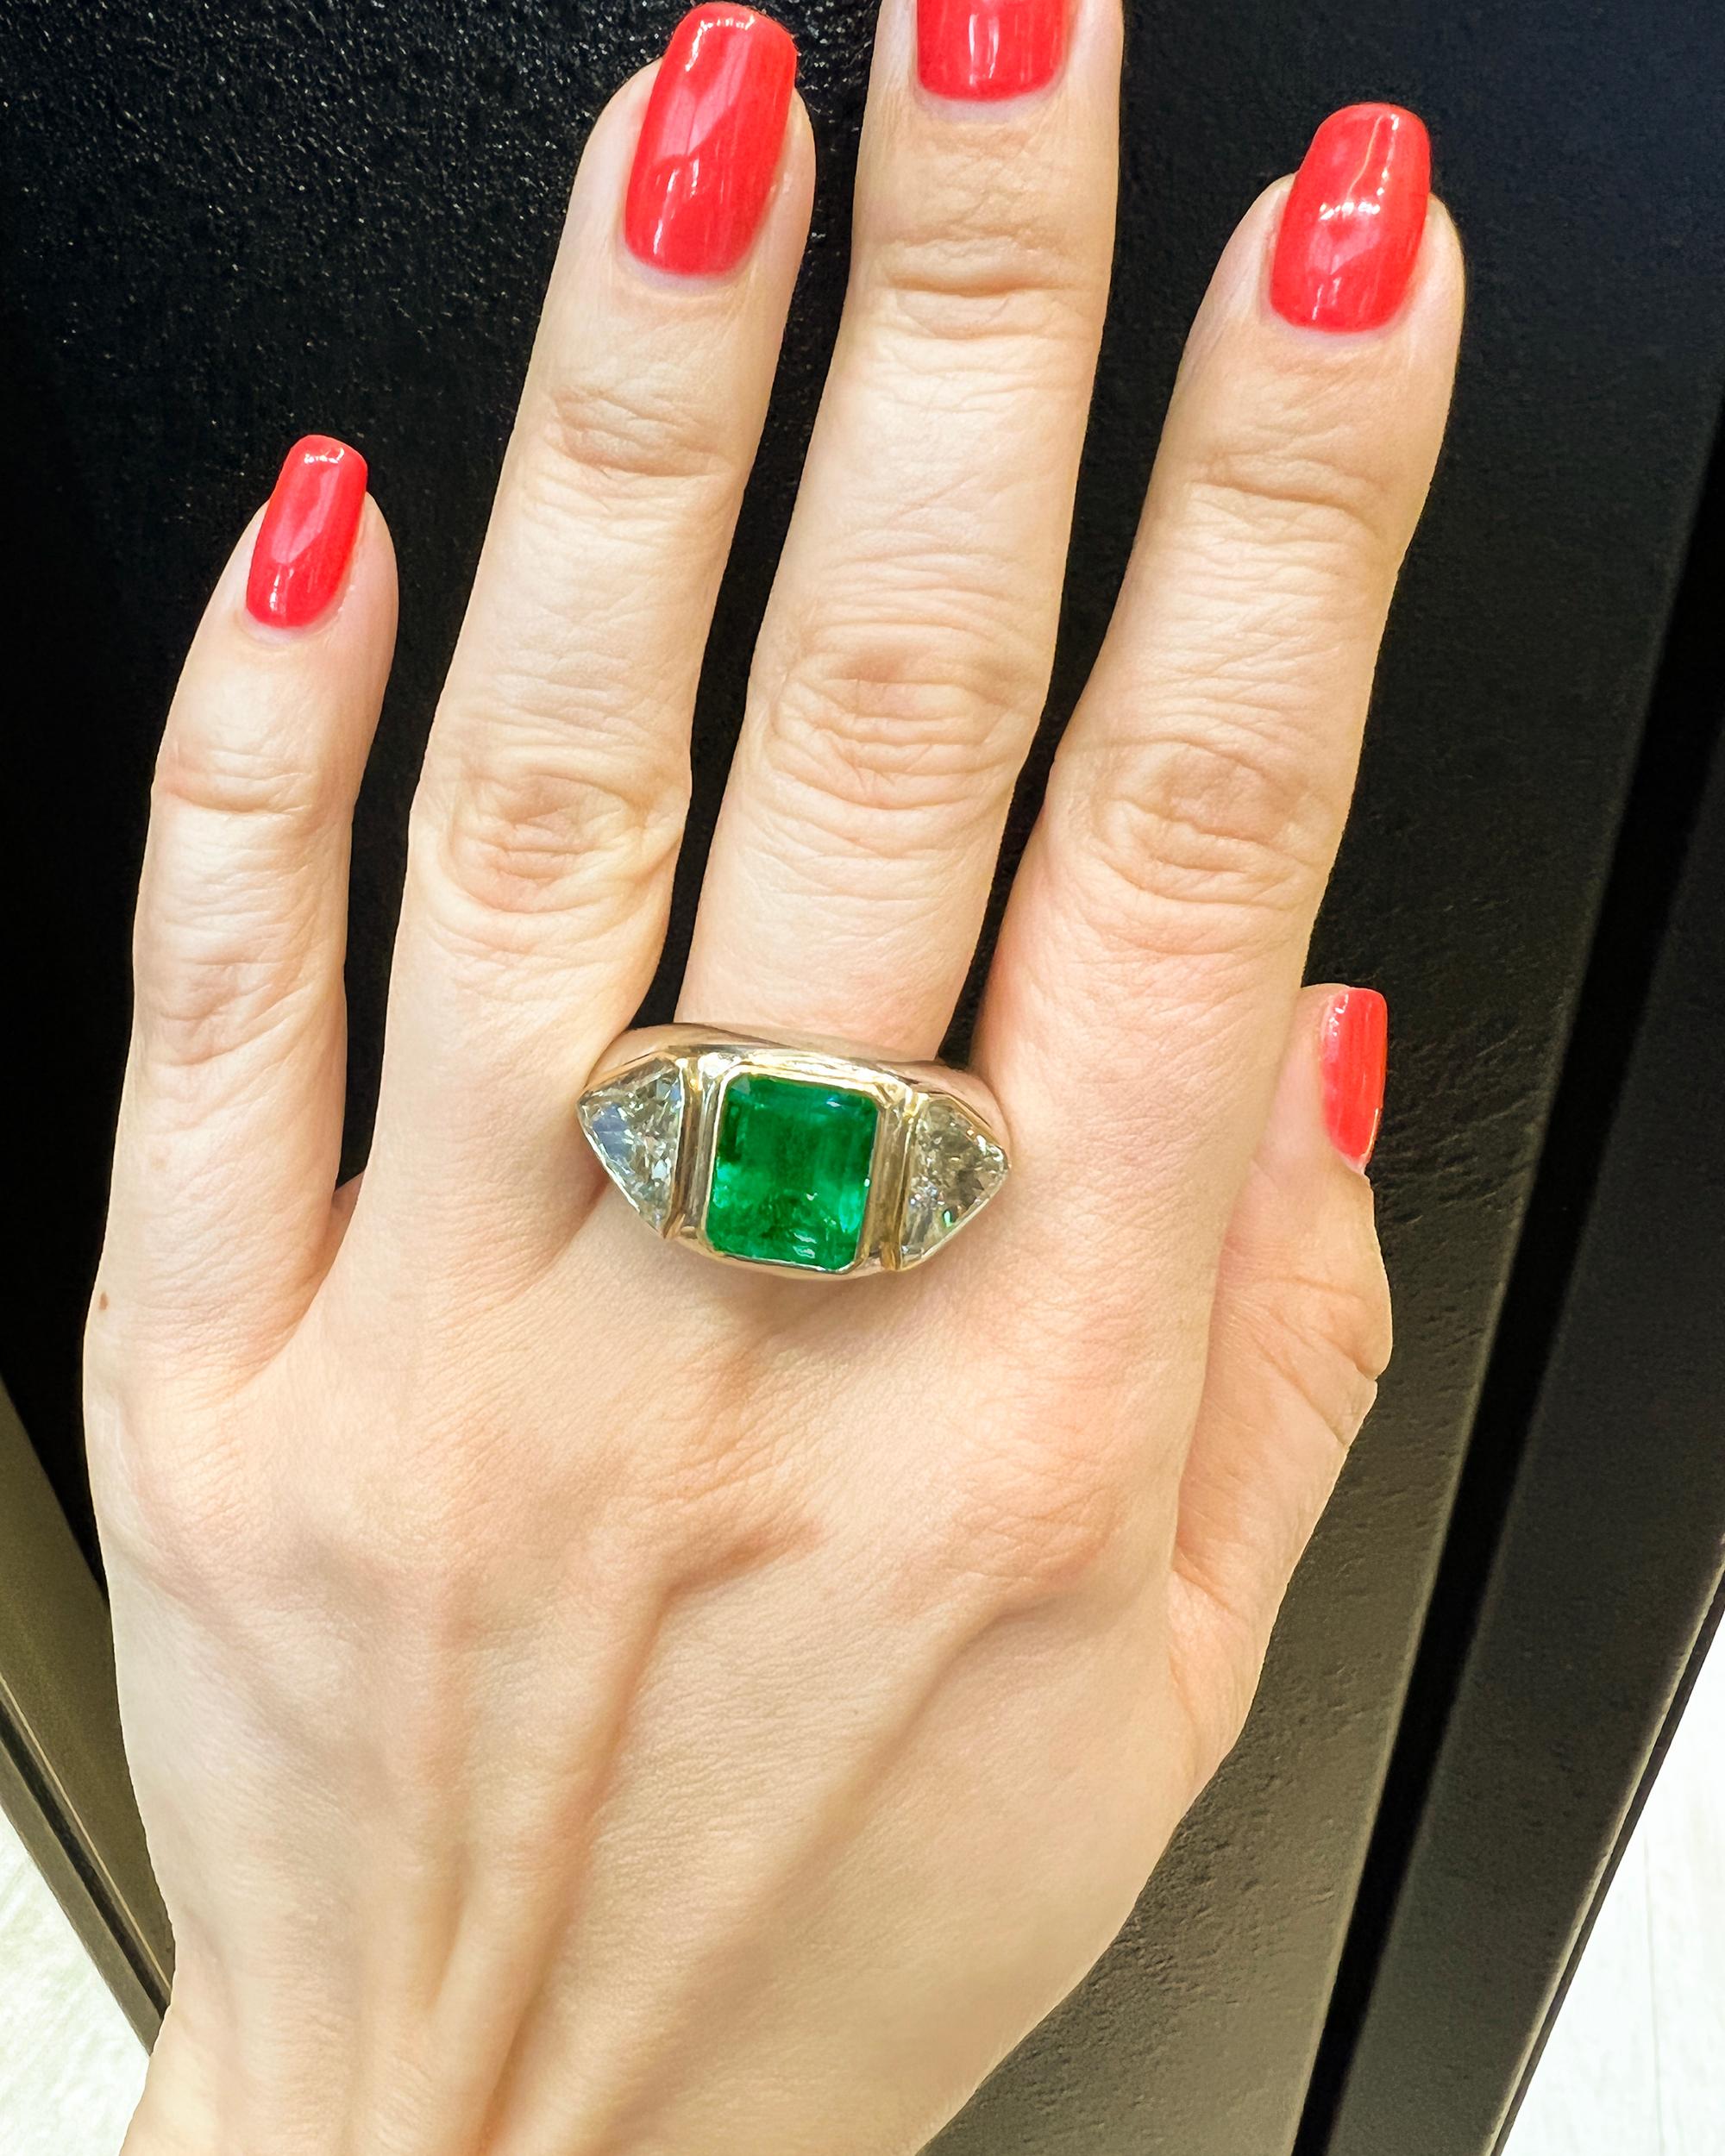 What could be bolder than this Art Deco-inspired emerald jewel, equally stunning as a cocktail or engagement ring, with fabulous diamond shoulders? With its wide band and statement-making qualities, the cigar band ring is a popular style for